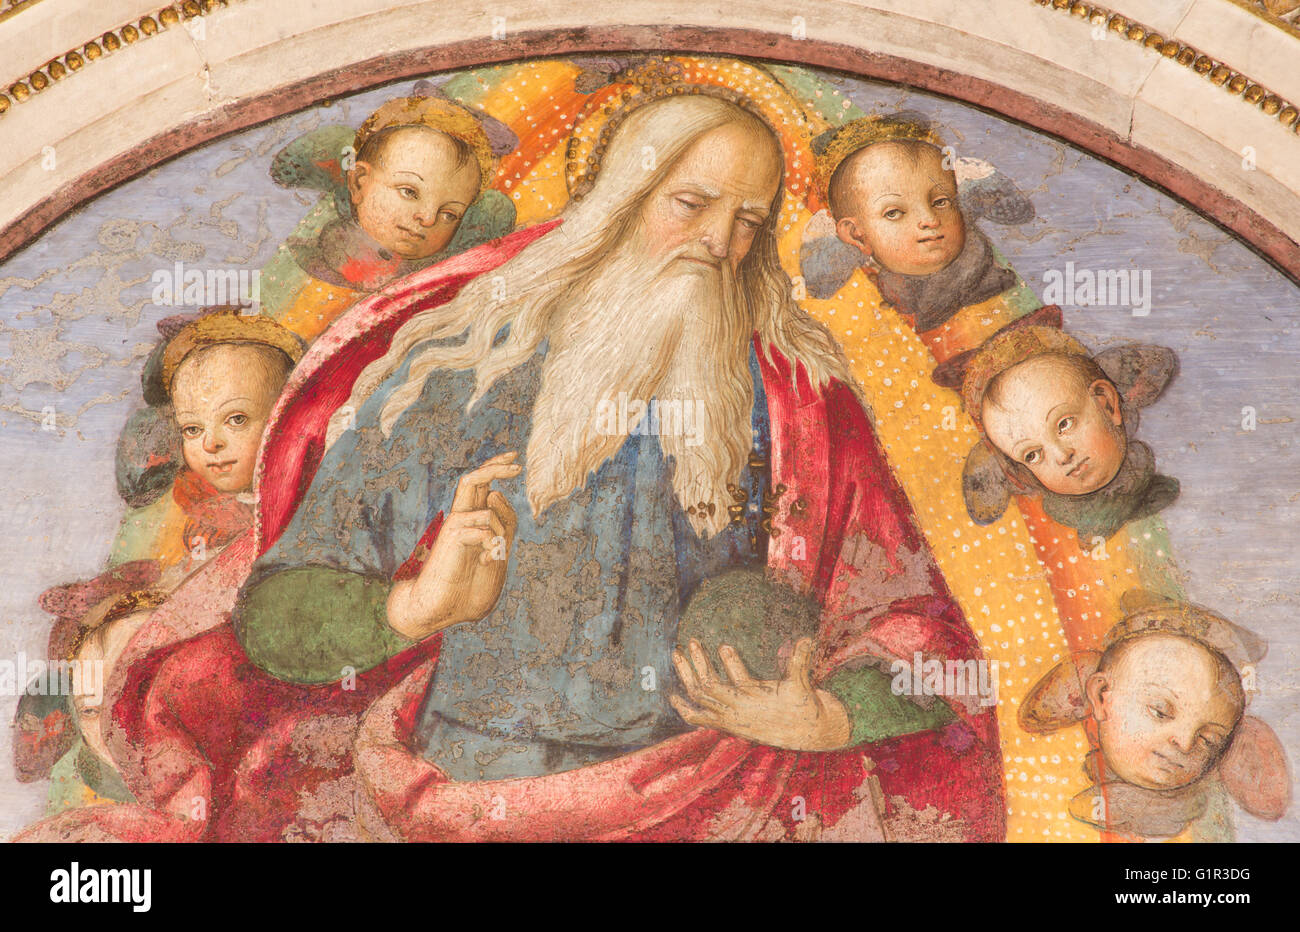 ROME, ITALY - MARCH 9, 2016: The fresco The God the Father giving his blessing by Aiuto del Pinturicchio (1489 - 1491) Stock Photo